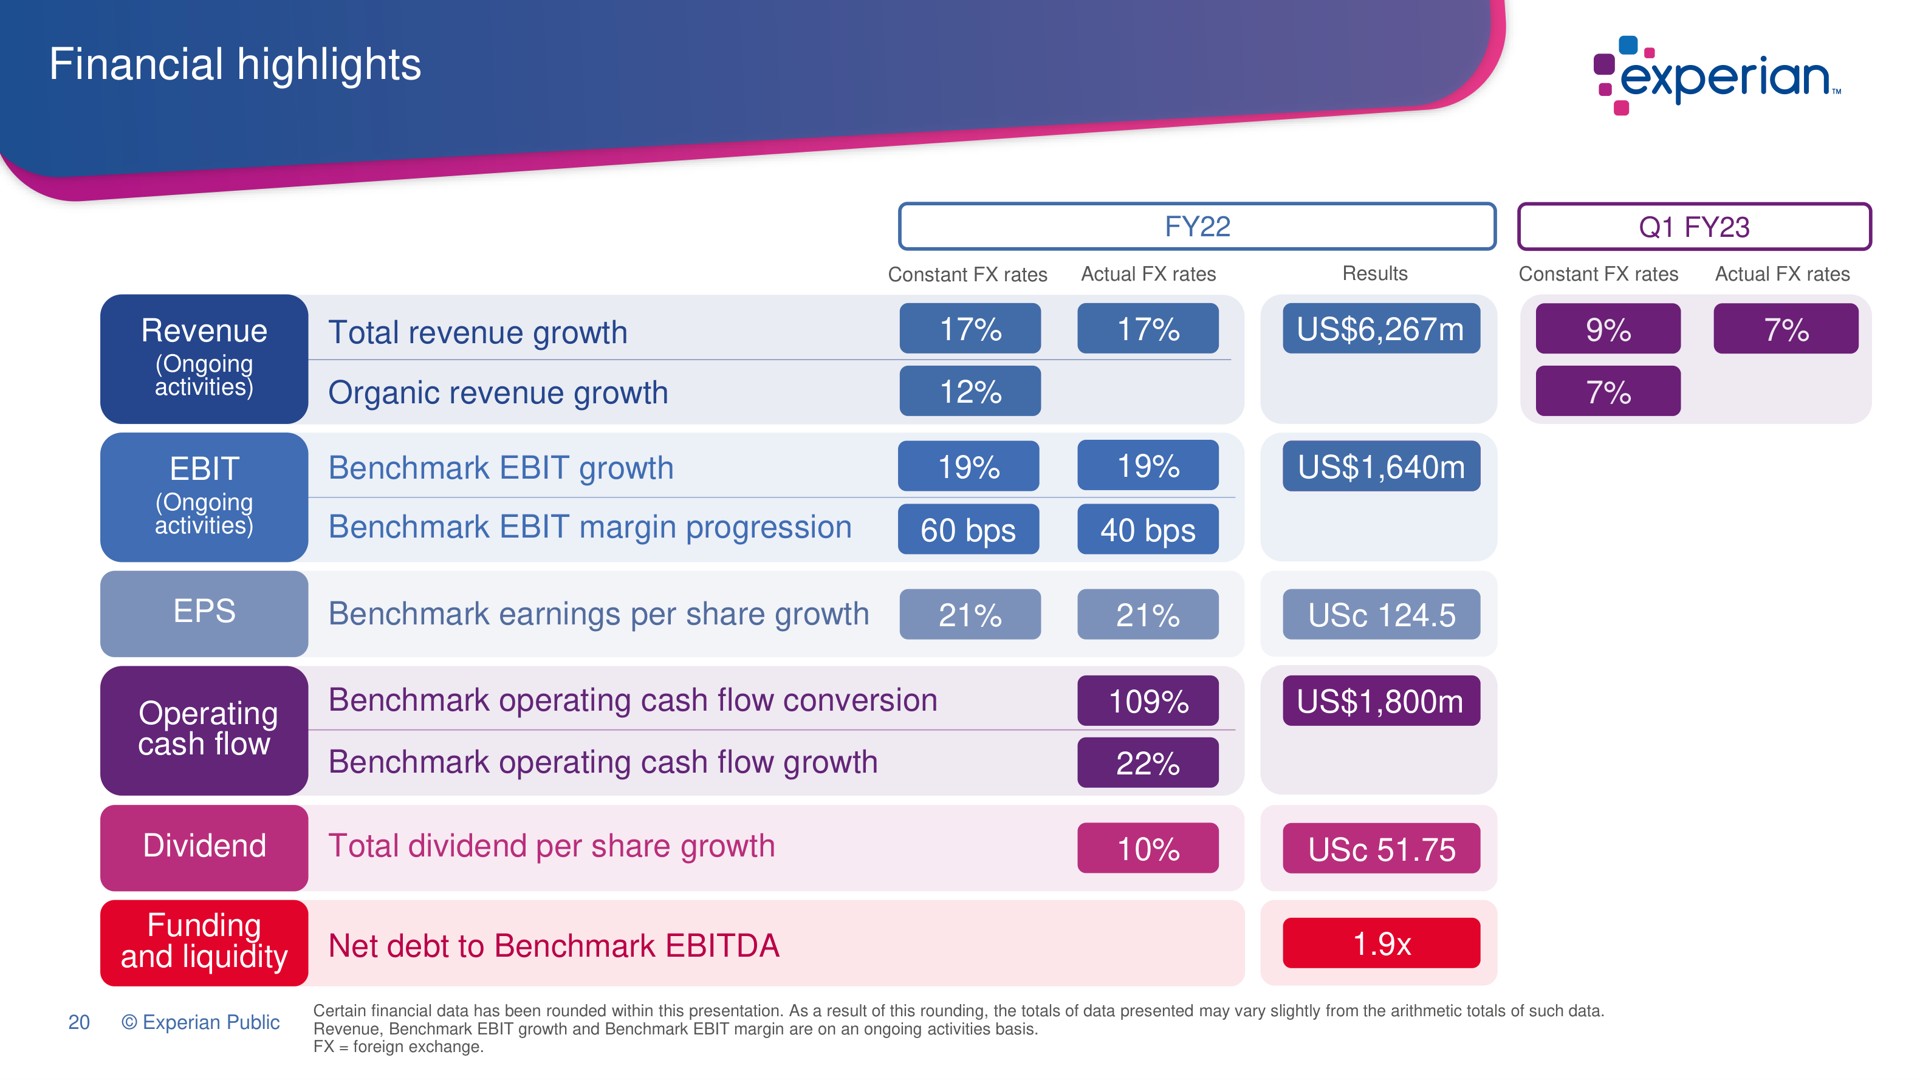 financial highlights total revenue growth organic revenue growth growth us us margin progression revenue earnings per share growth operating cash flow operating cash flow conversion operating cash flow growth us dividend total dividend per share growth funding and liquidity net debt to mein sie teen | Experian